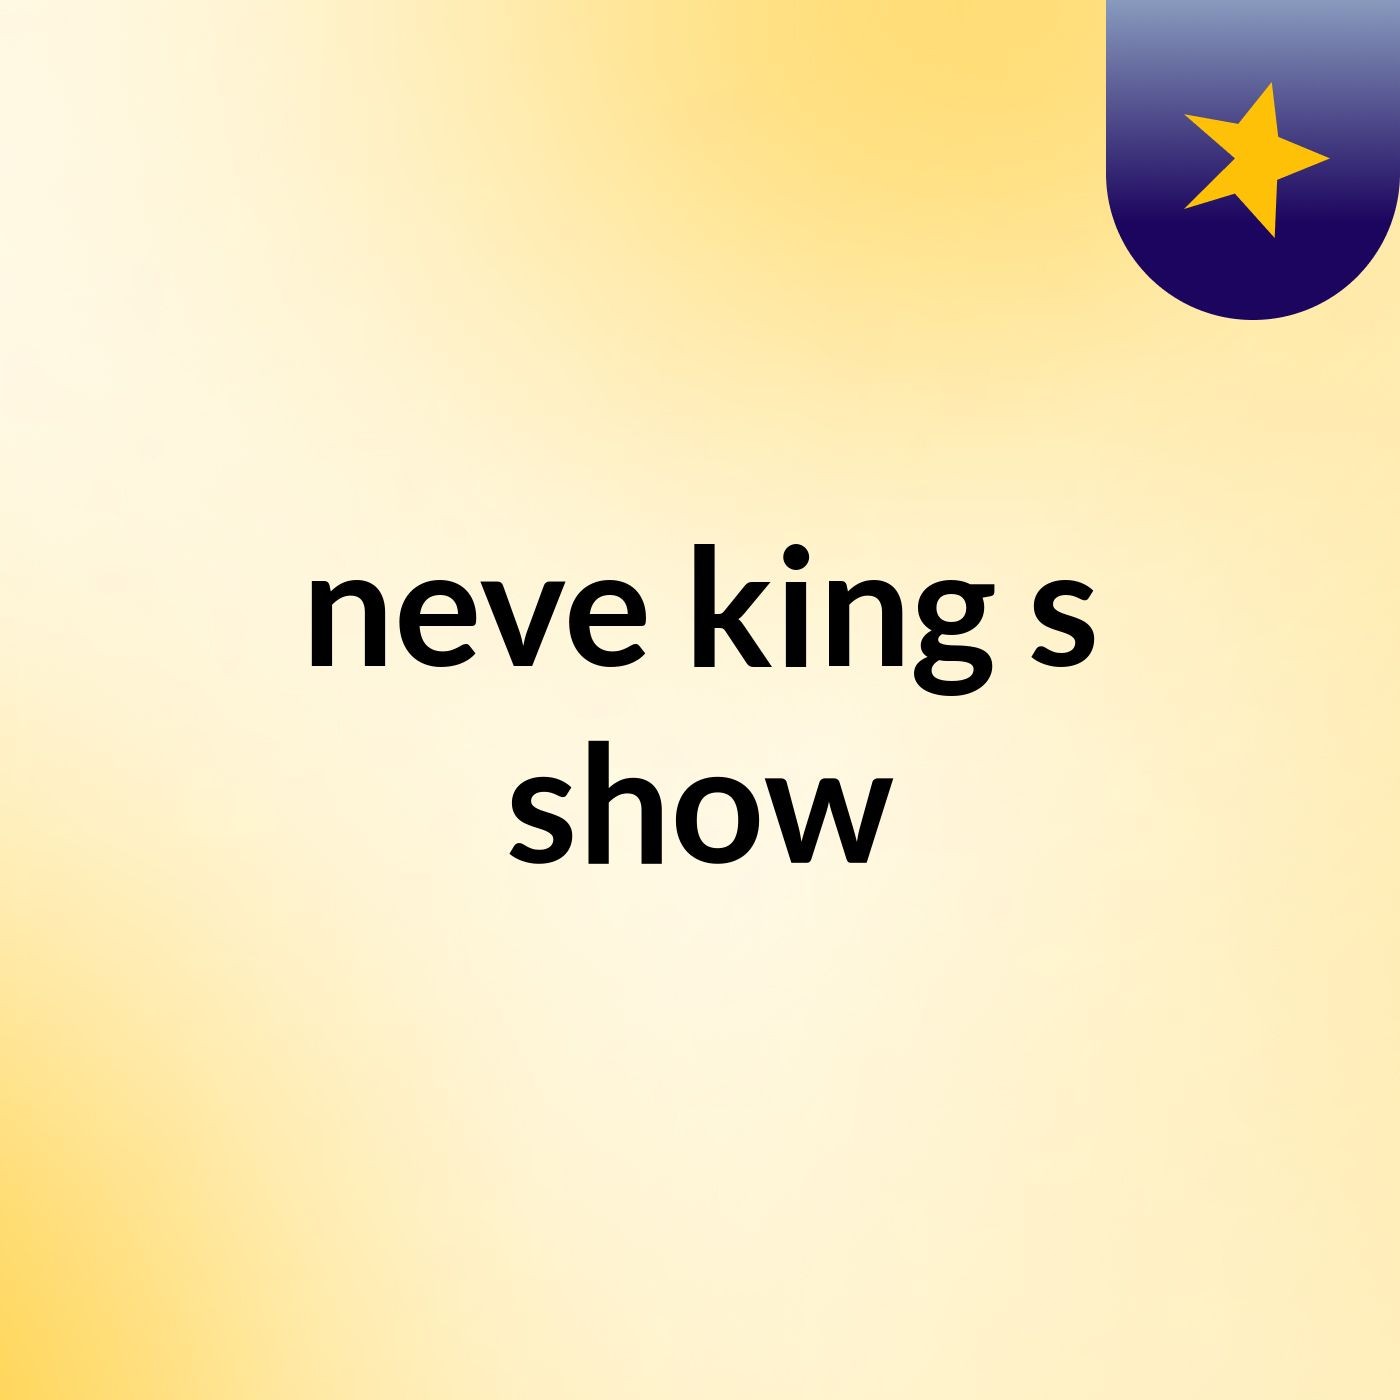 neve king's show